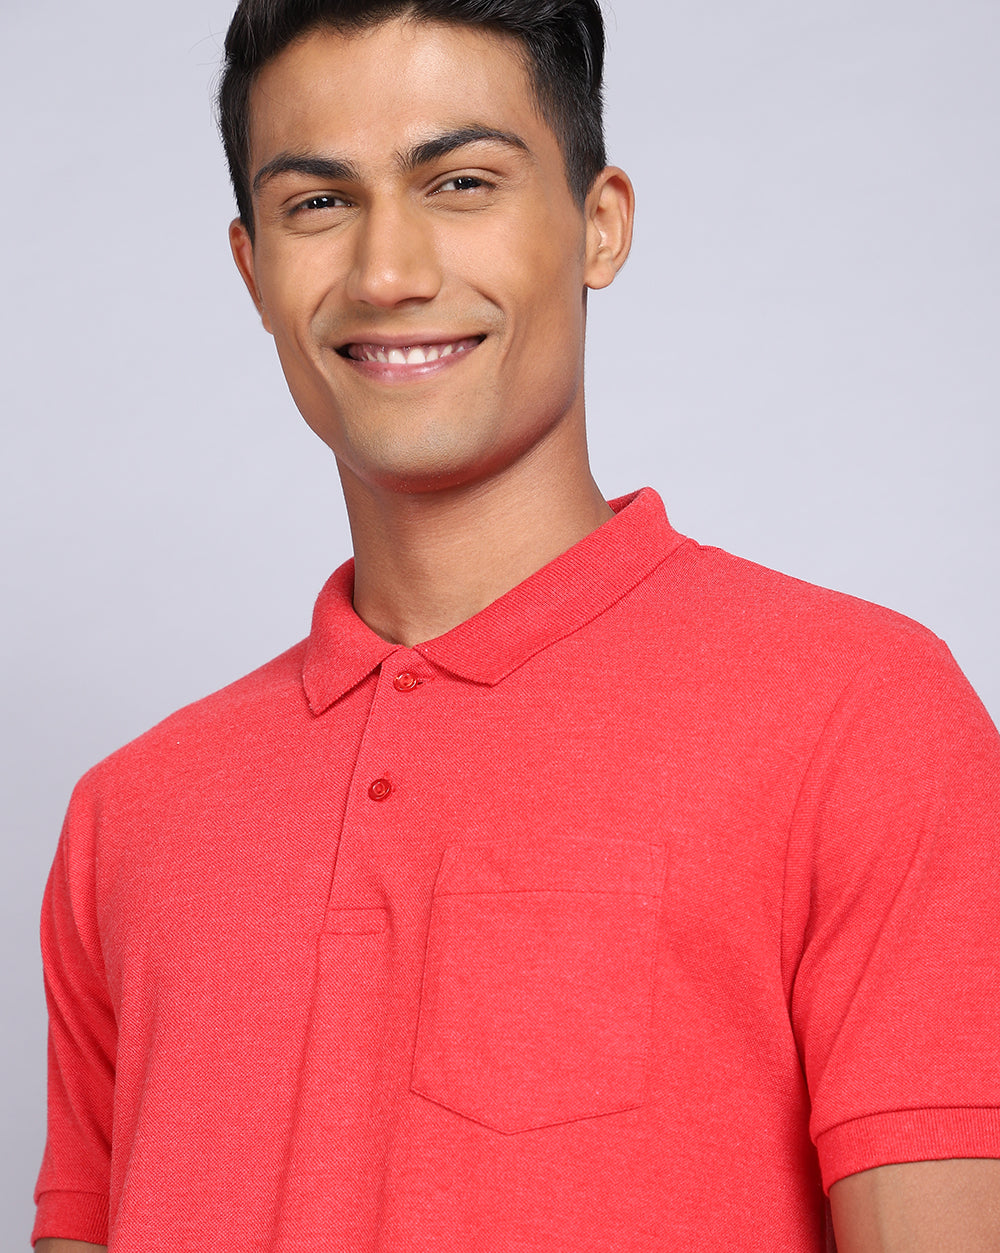 Regular Fit 2 Button Polo T-Shirt Maroon